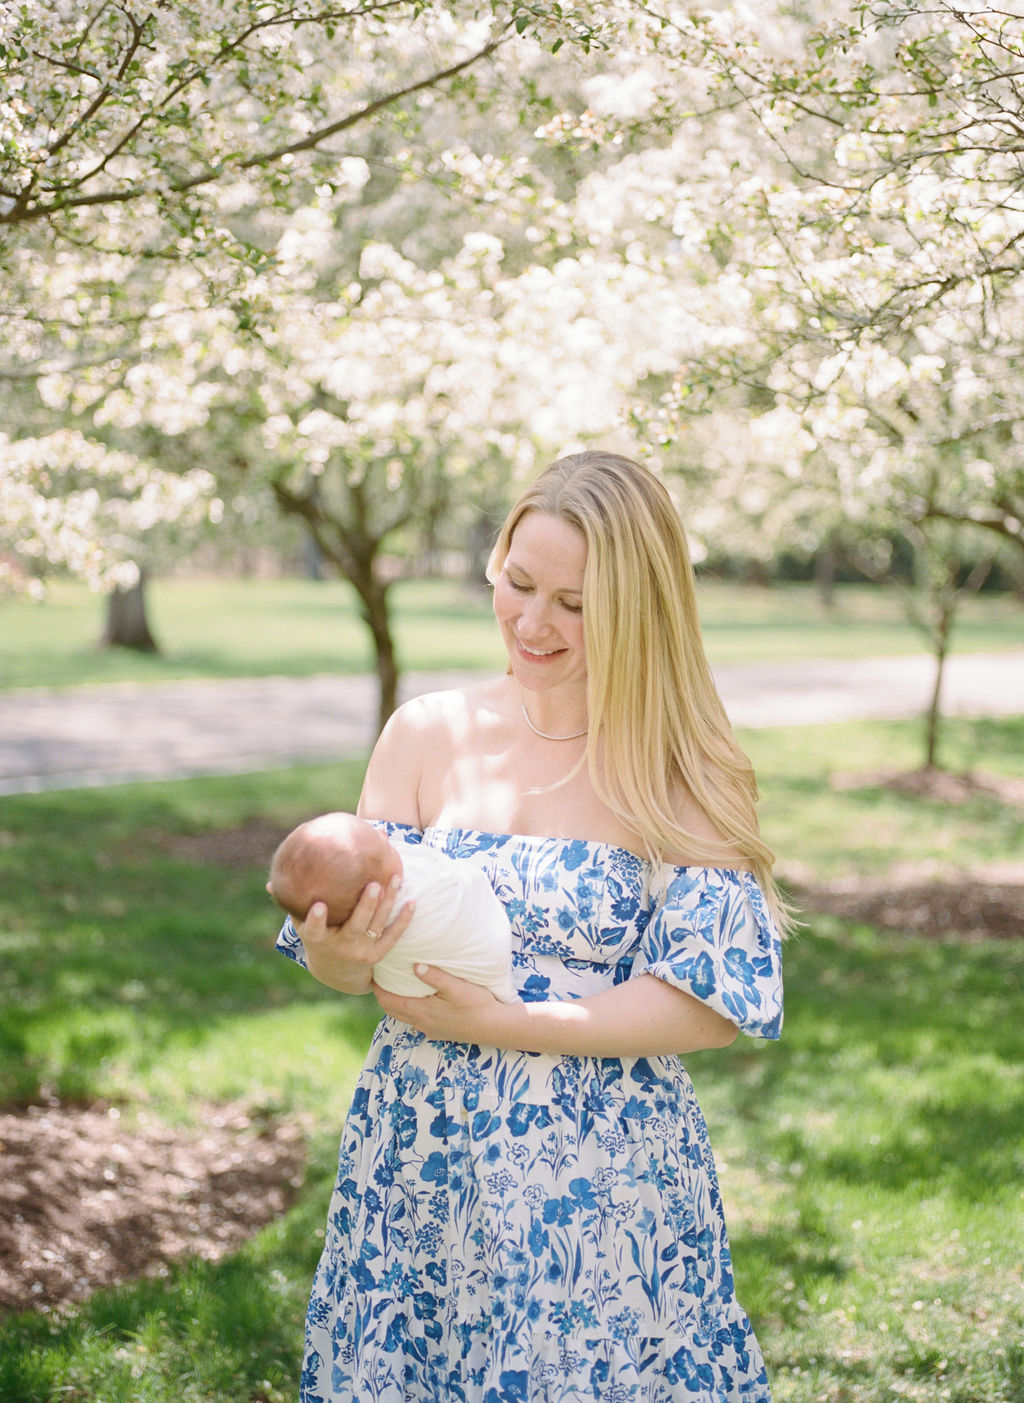 A new mother holds her newborn baby in front of her under white blooming trees